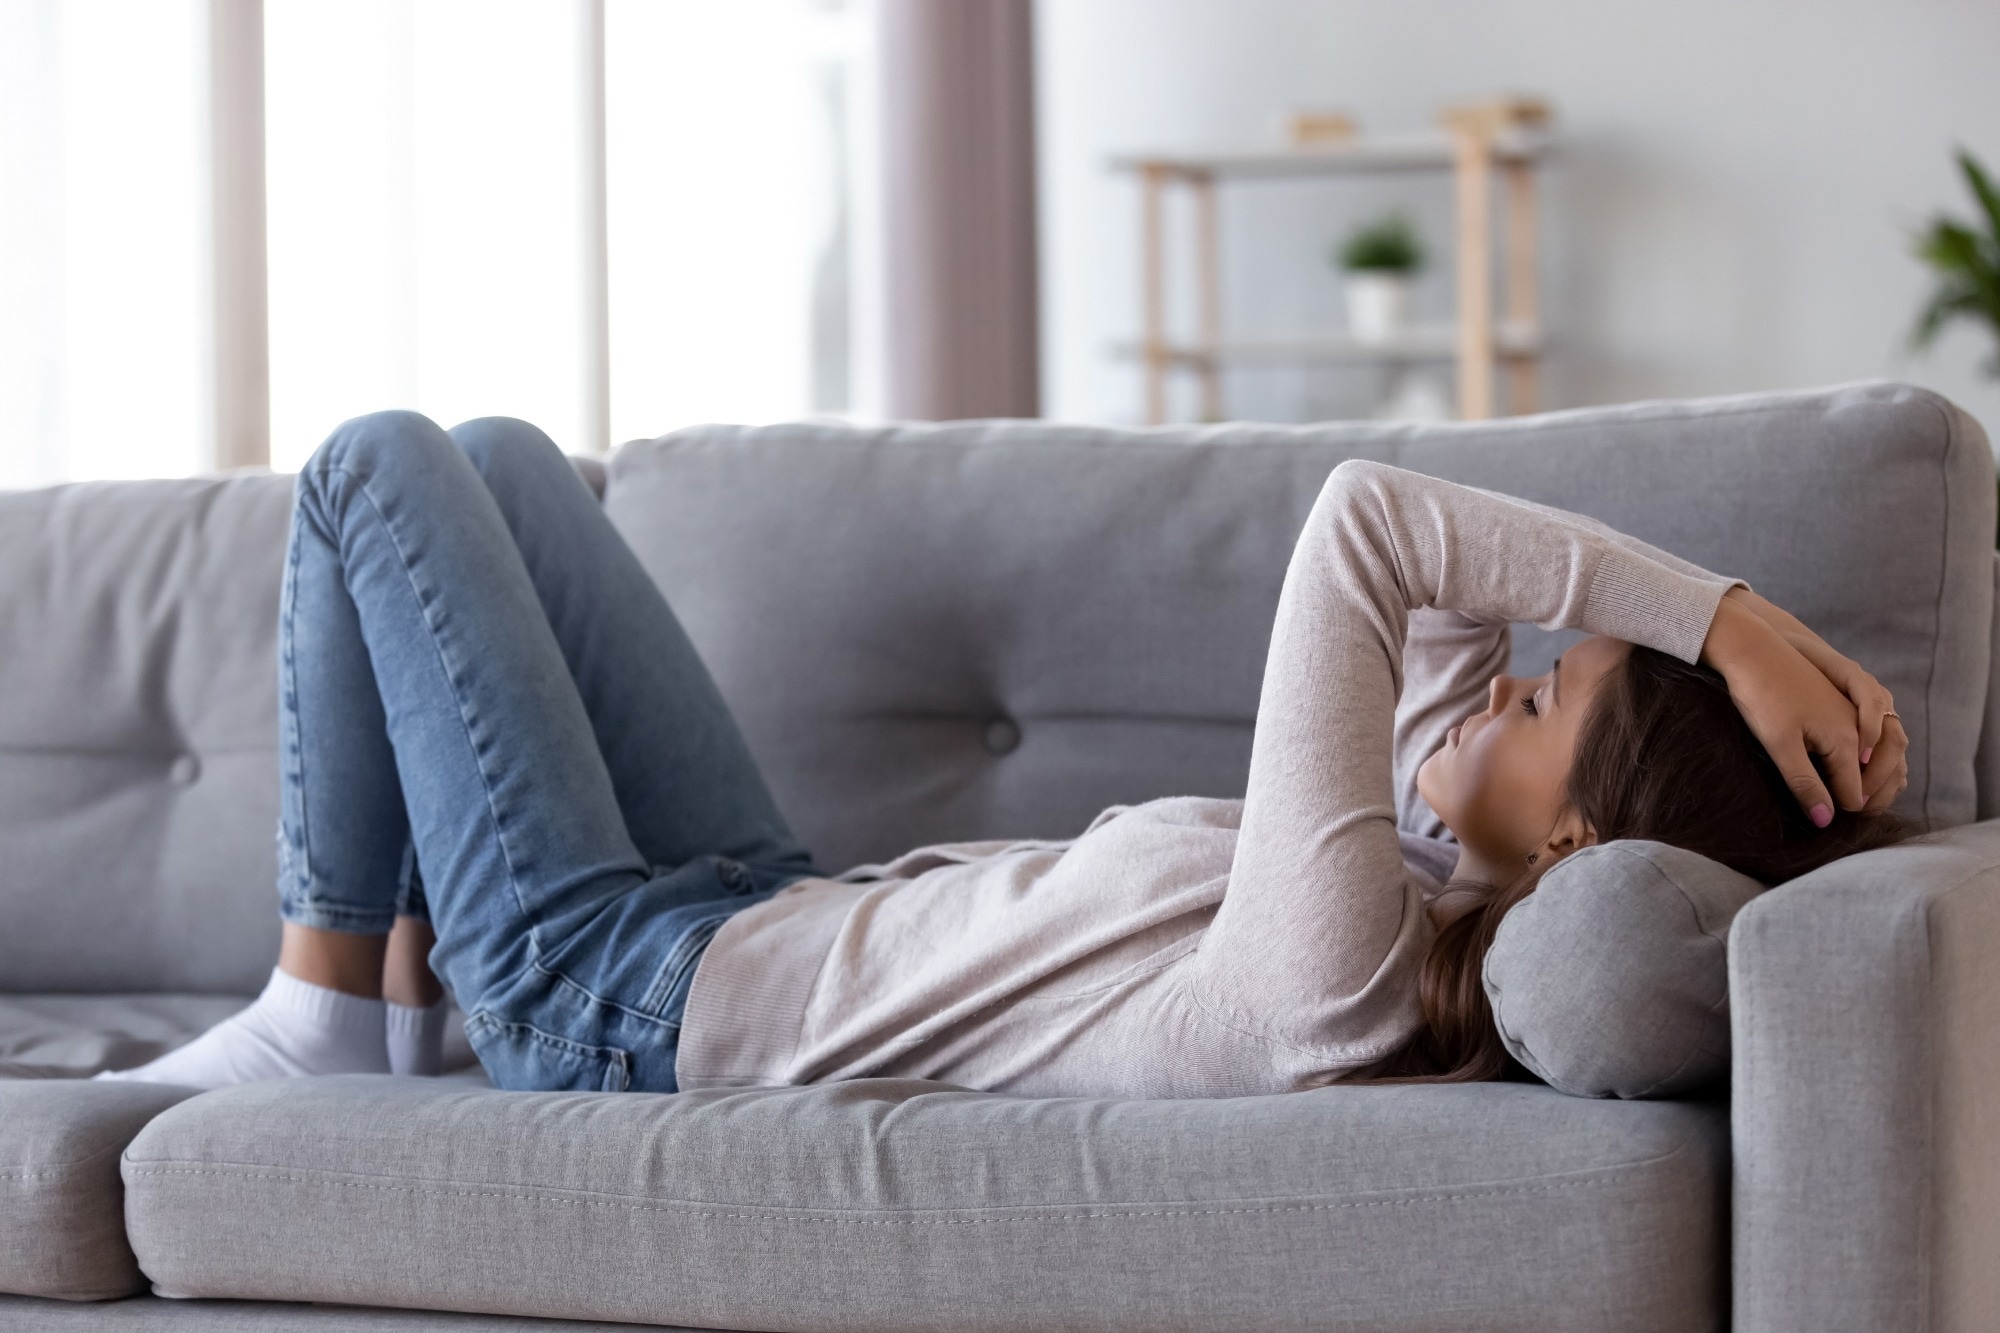 Study: Efficacy of cognitive behavioral therapy targeting severe fatigue following COVID-19: results of a randomized controlled trial. Image Credit: fizkes/Shutterstock.com